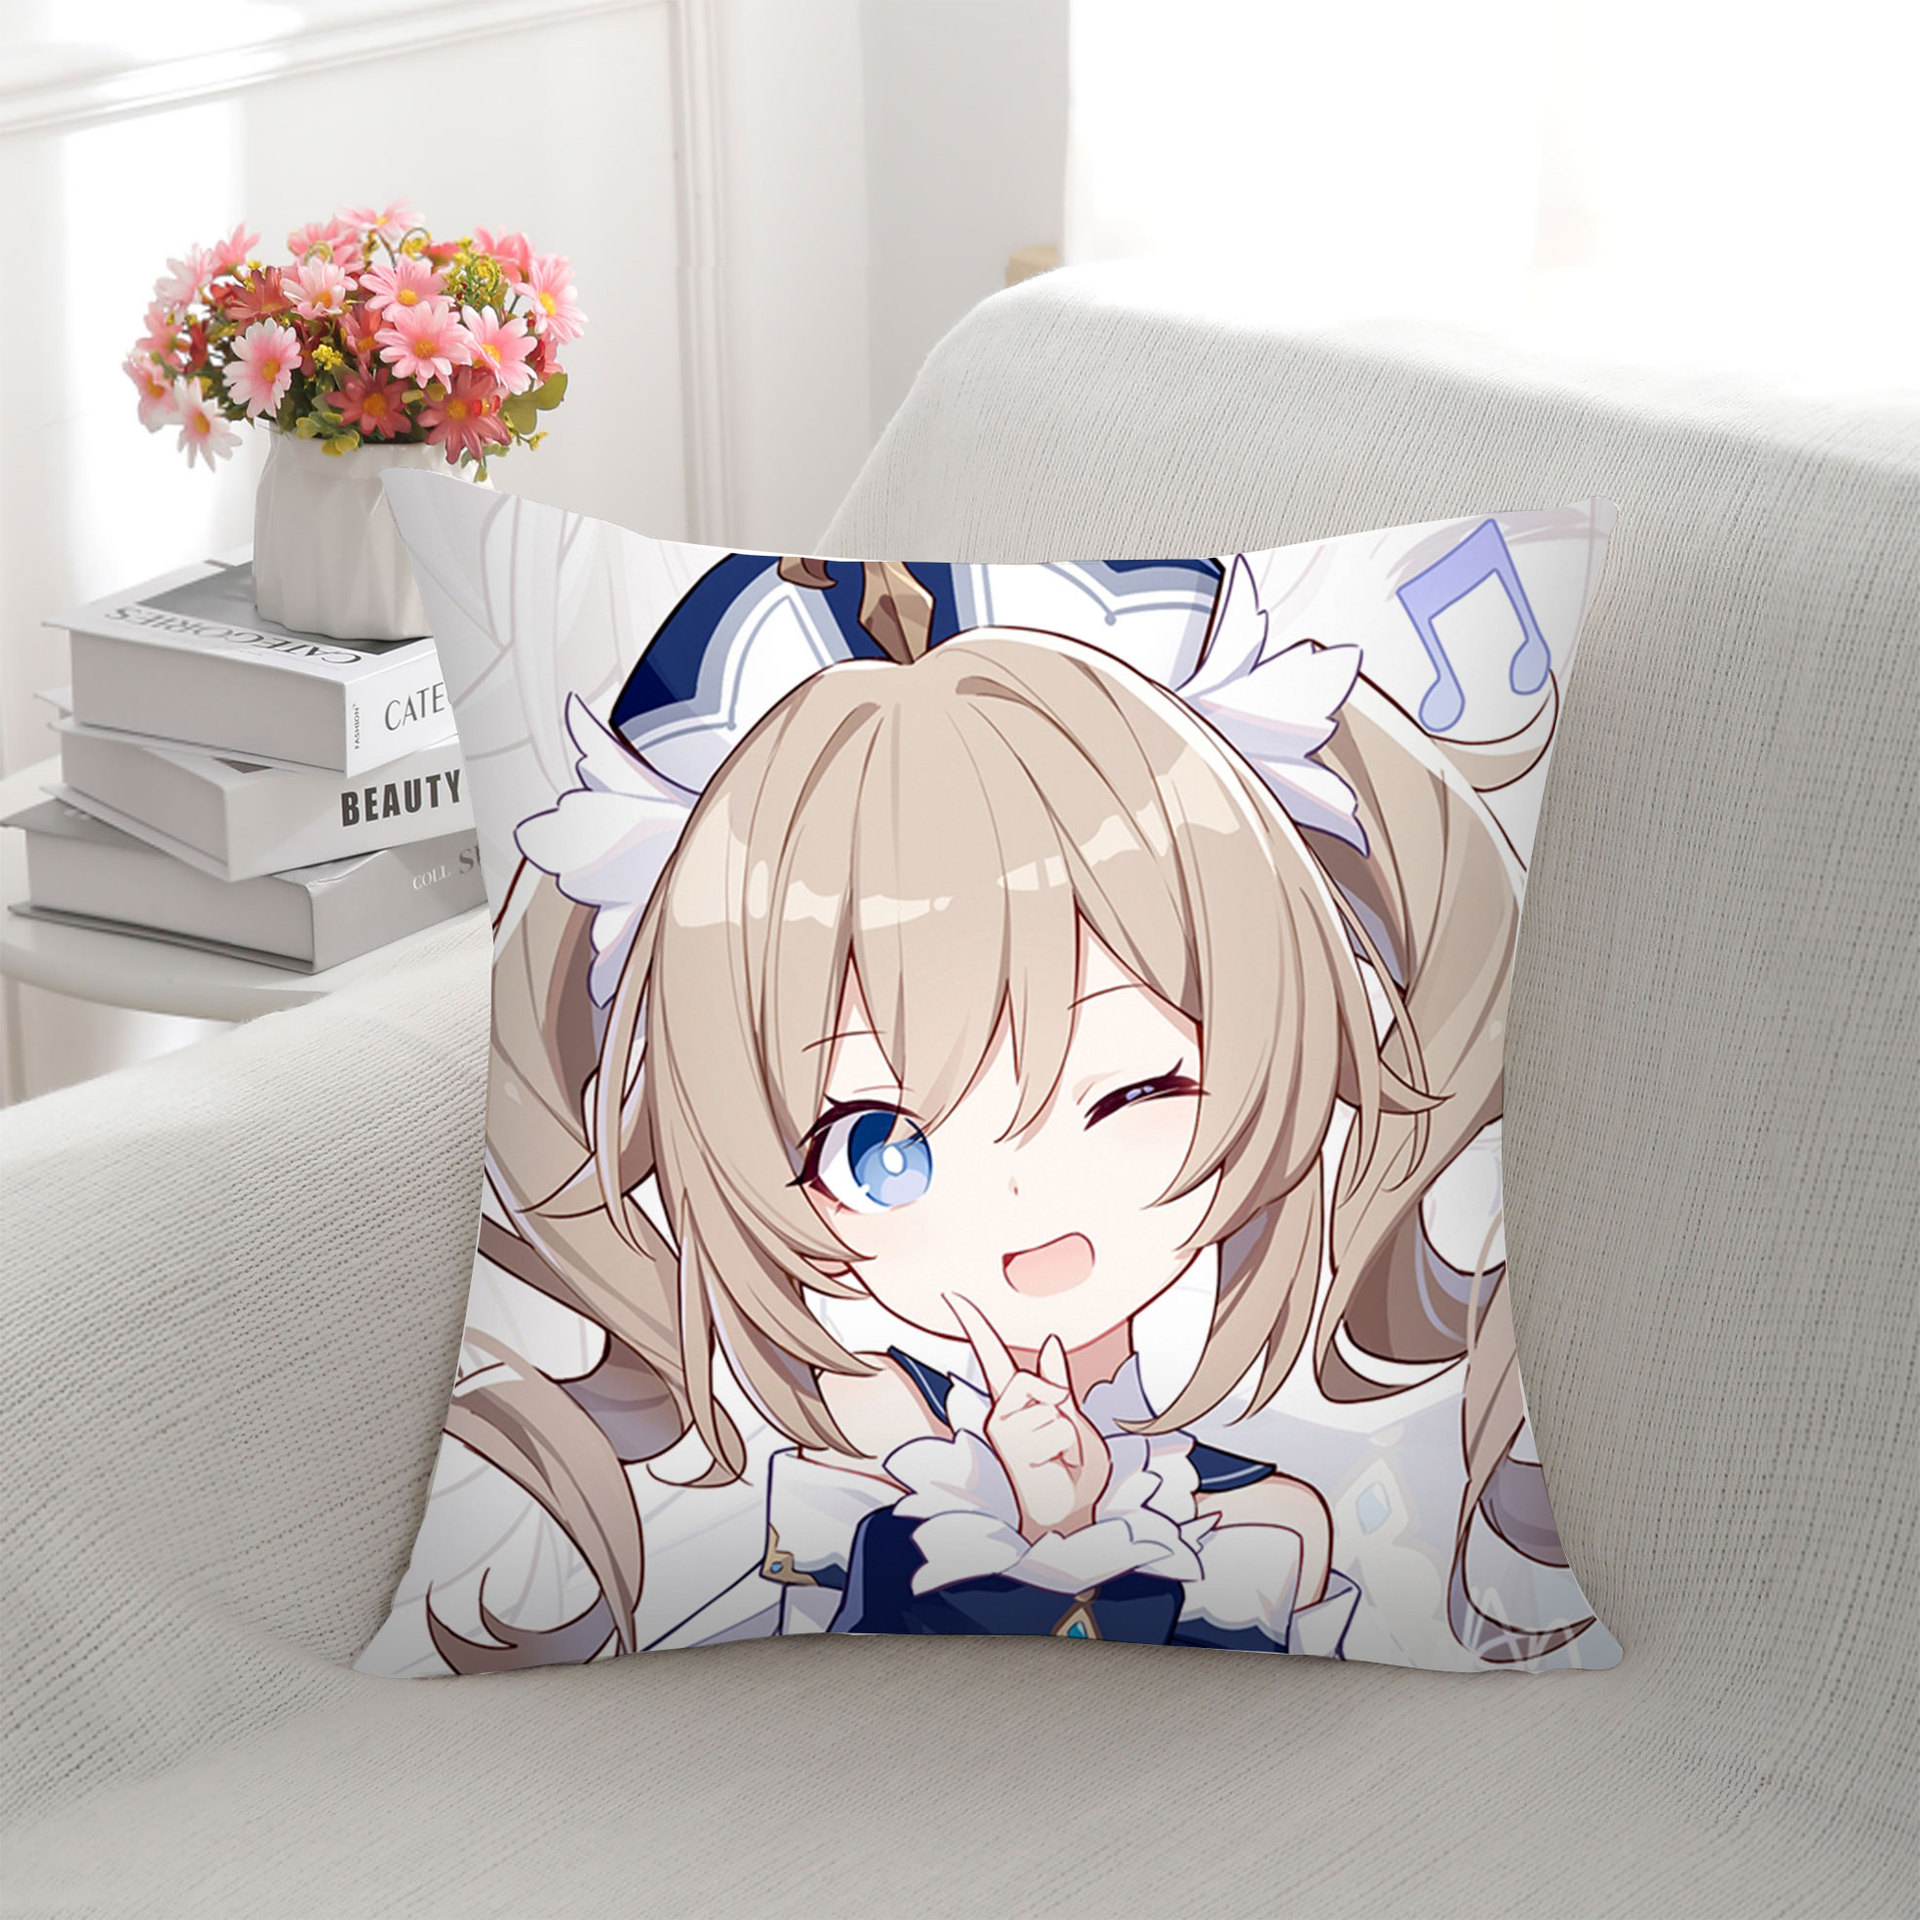 In Stock Original God Peripheral Printed Plush Pillow Cartoon Anime Two-Dimensional Backrest Sofa Bedroom and Household Pillow